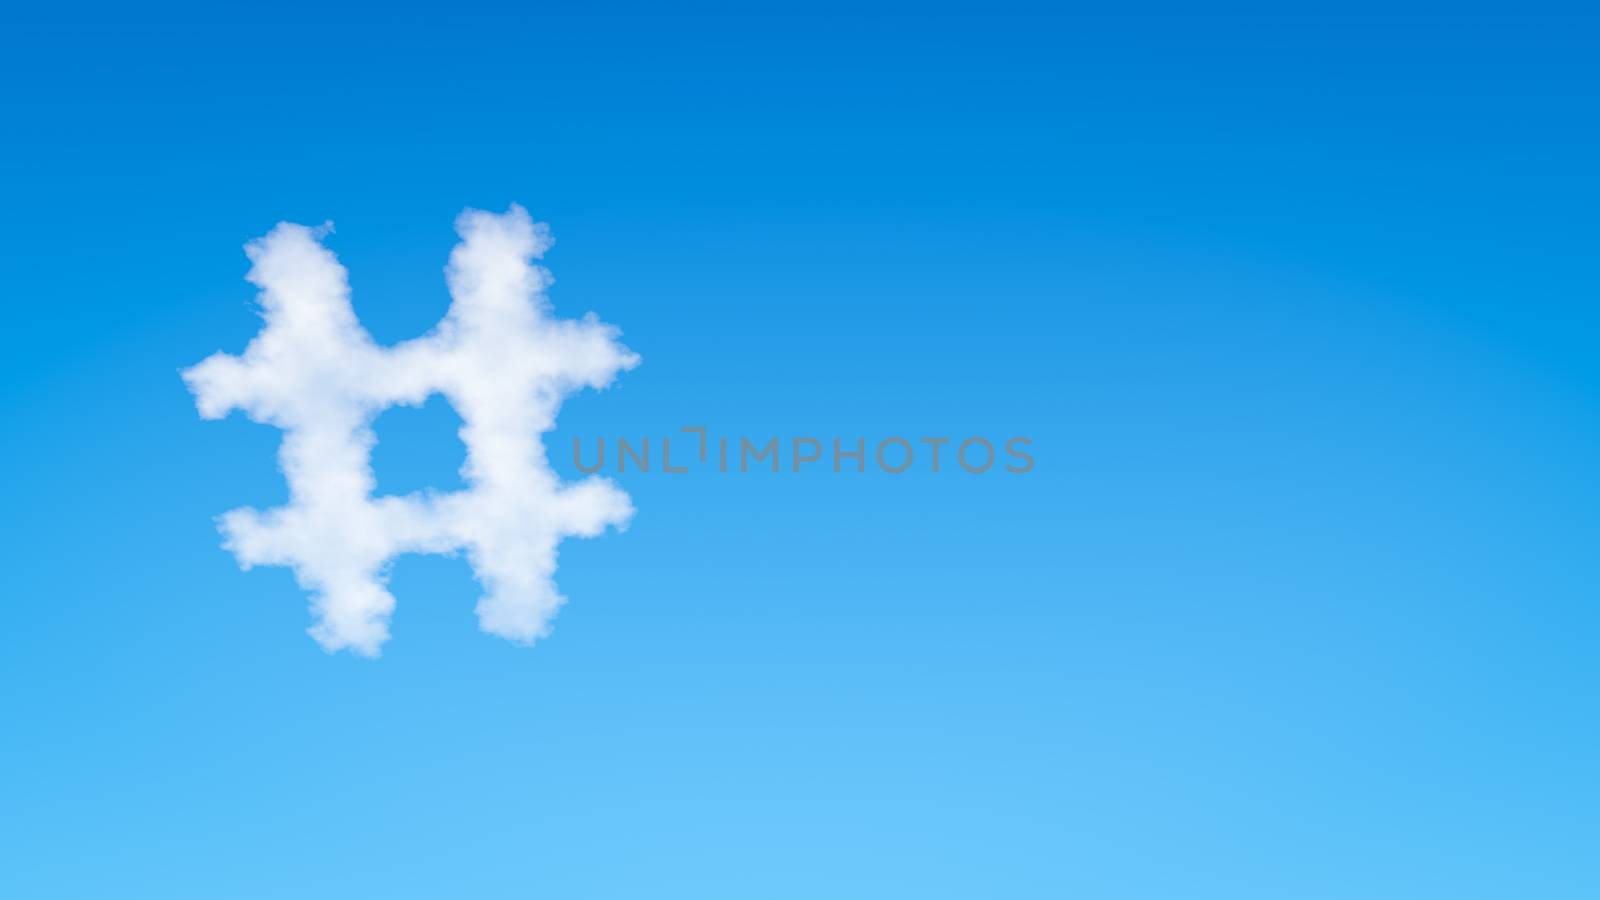 Single Hash Symbol Shaped Cloud in the Blue Sky with Copyspace